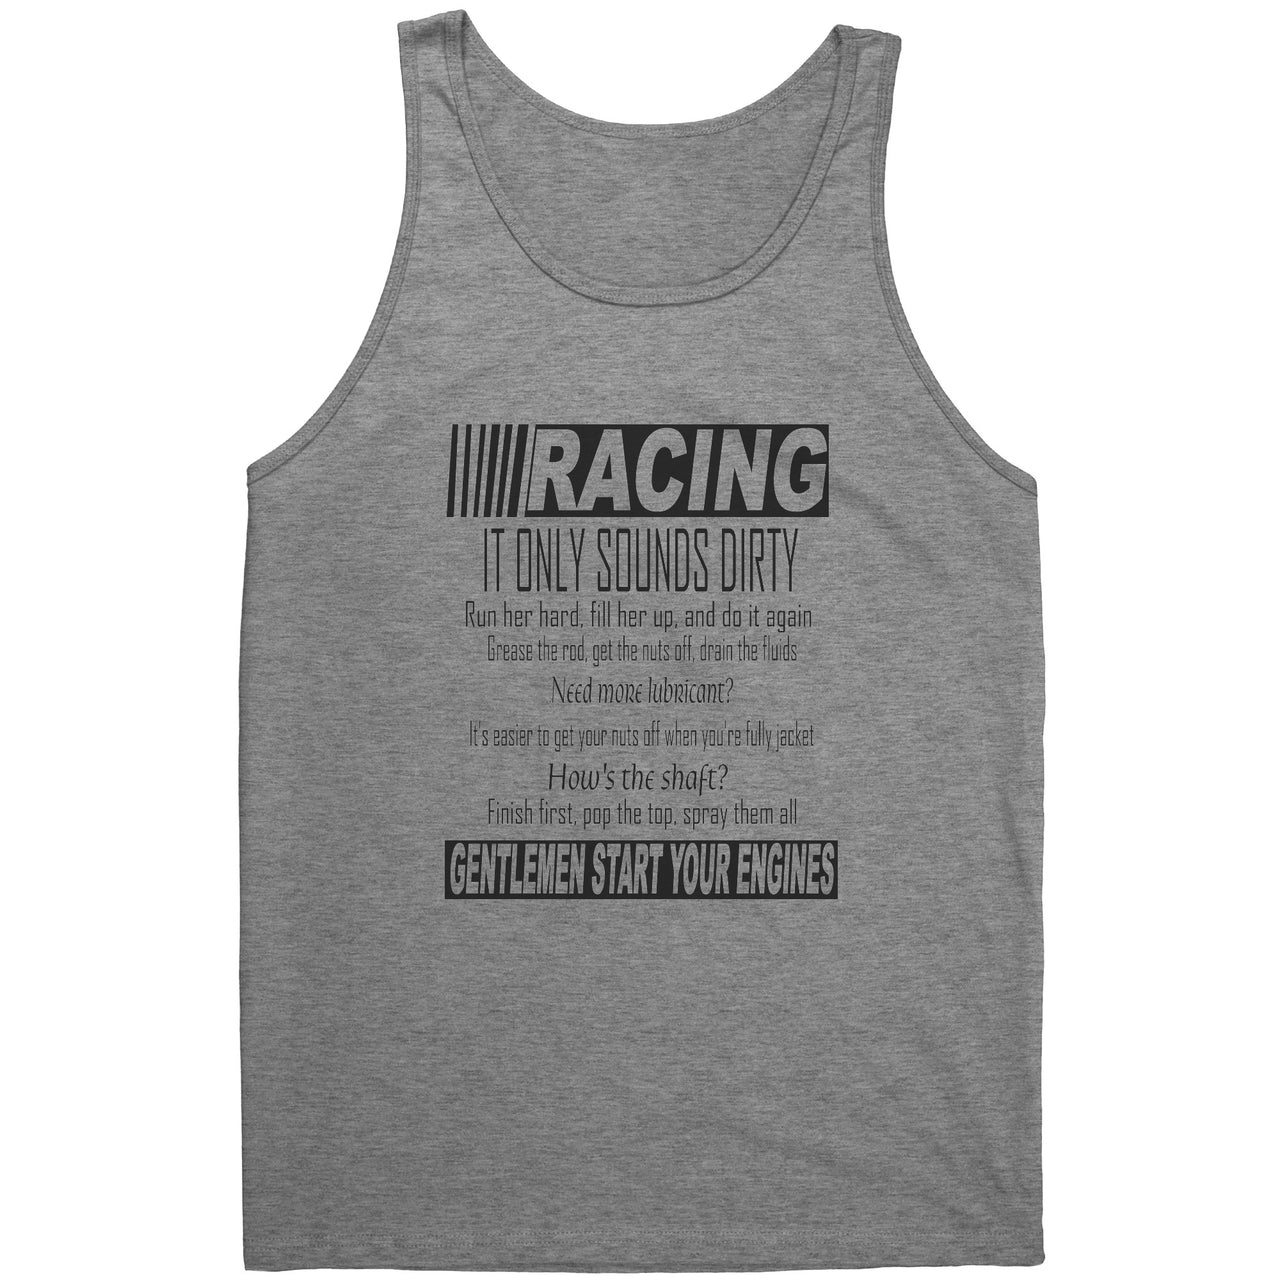 Racing It only sounds dirty Tanks/Hoodies BV